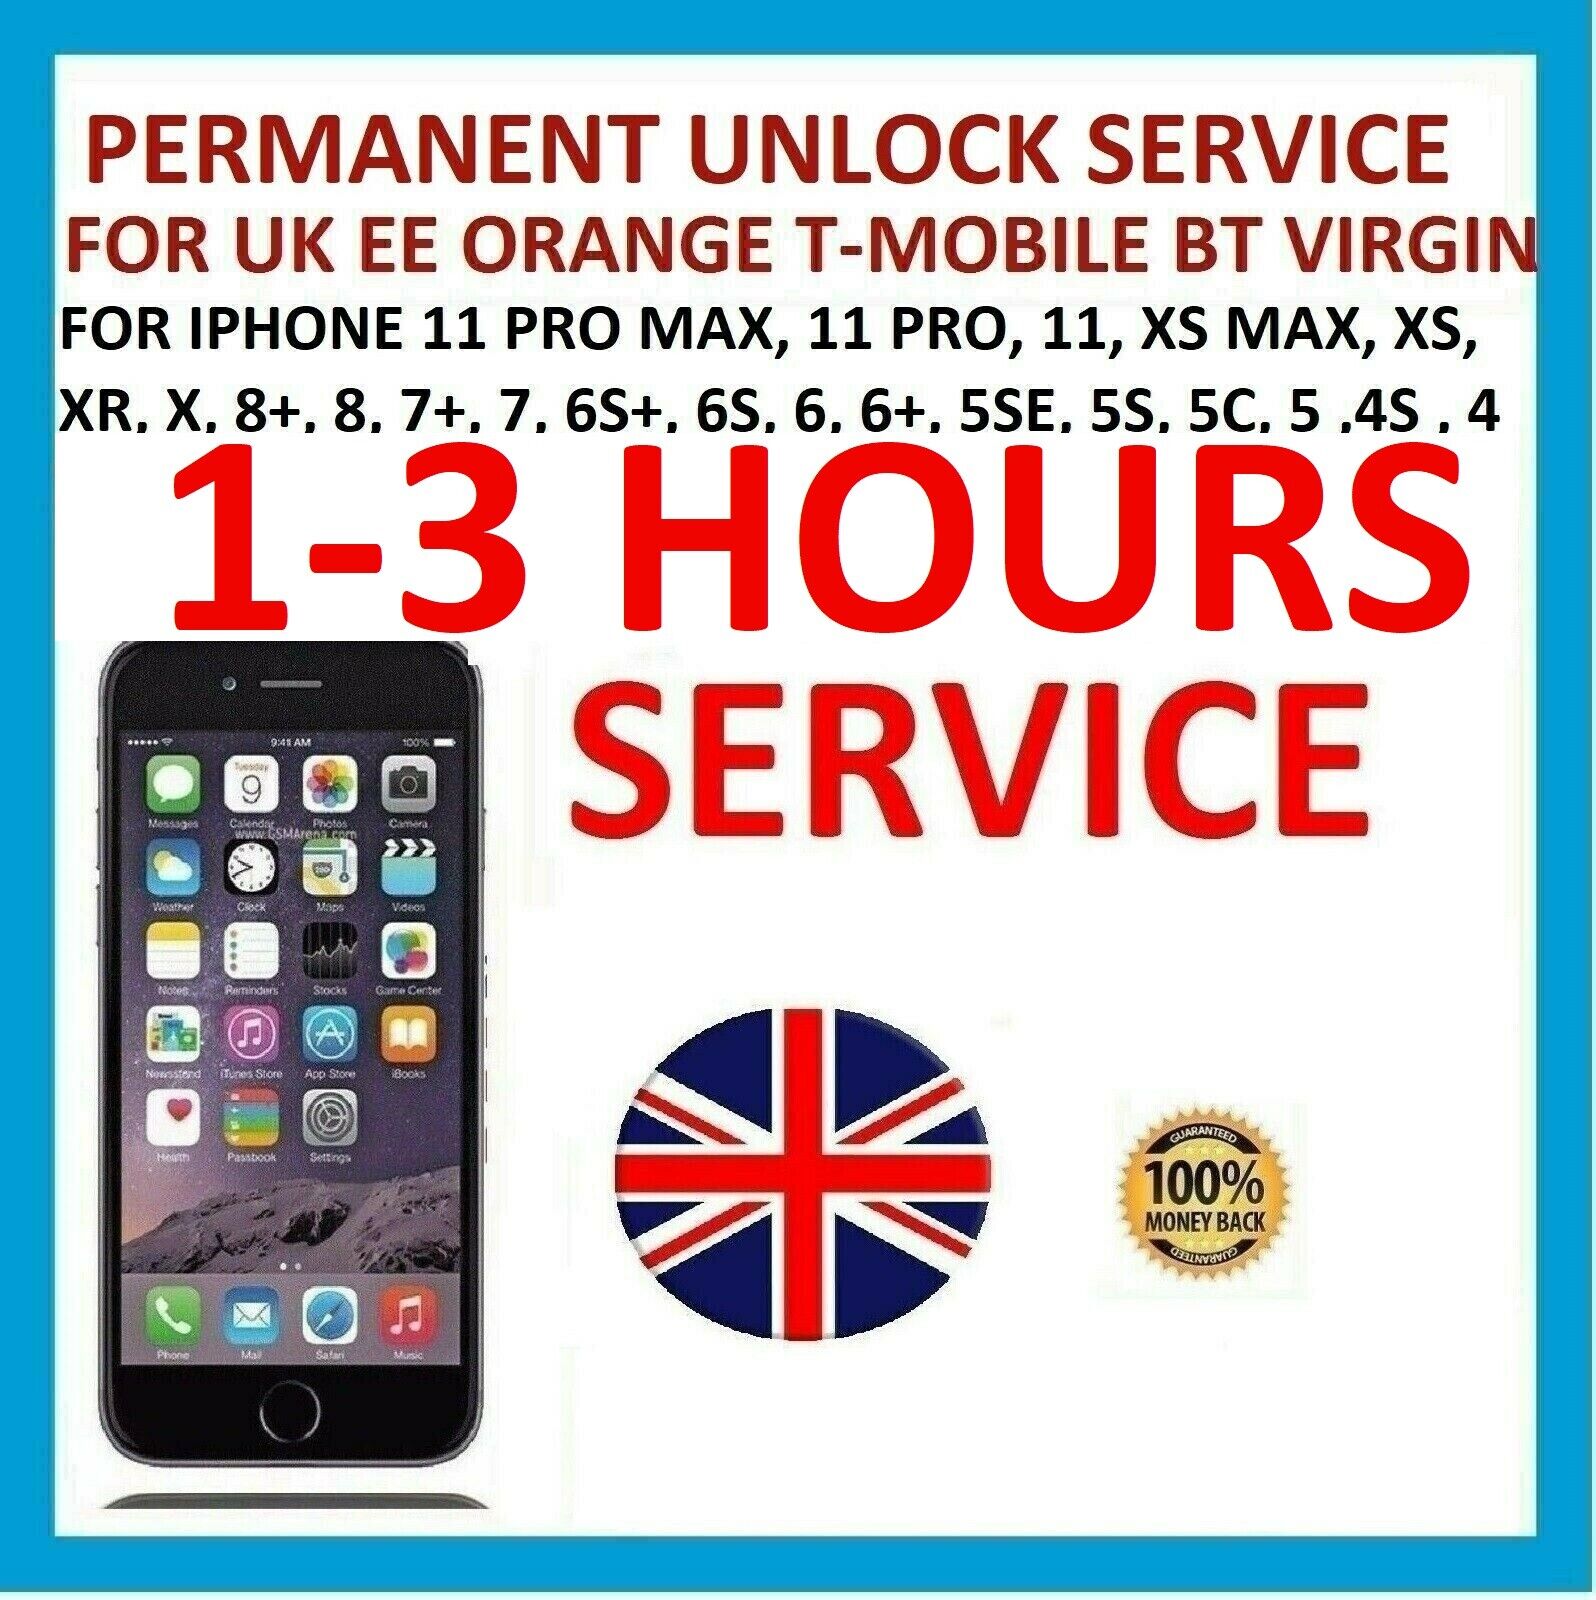 UNLOCK CODE SERVICE FOR iPhone 7 7 Plus 6S 6S+ 6 SE 5S FOR EE ORANGE T-MOBILE UK